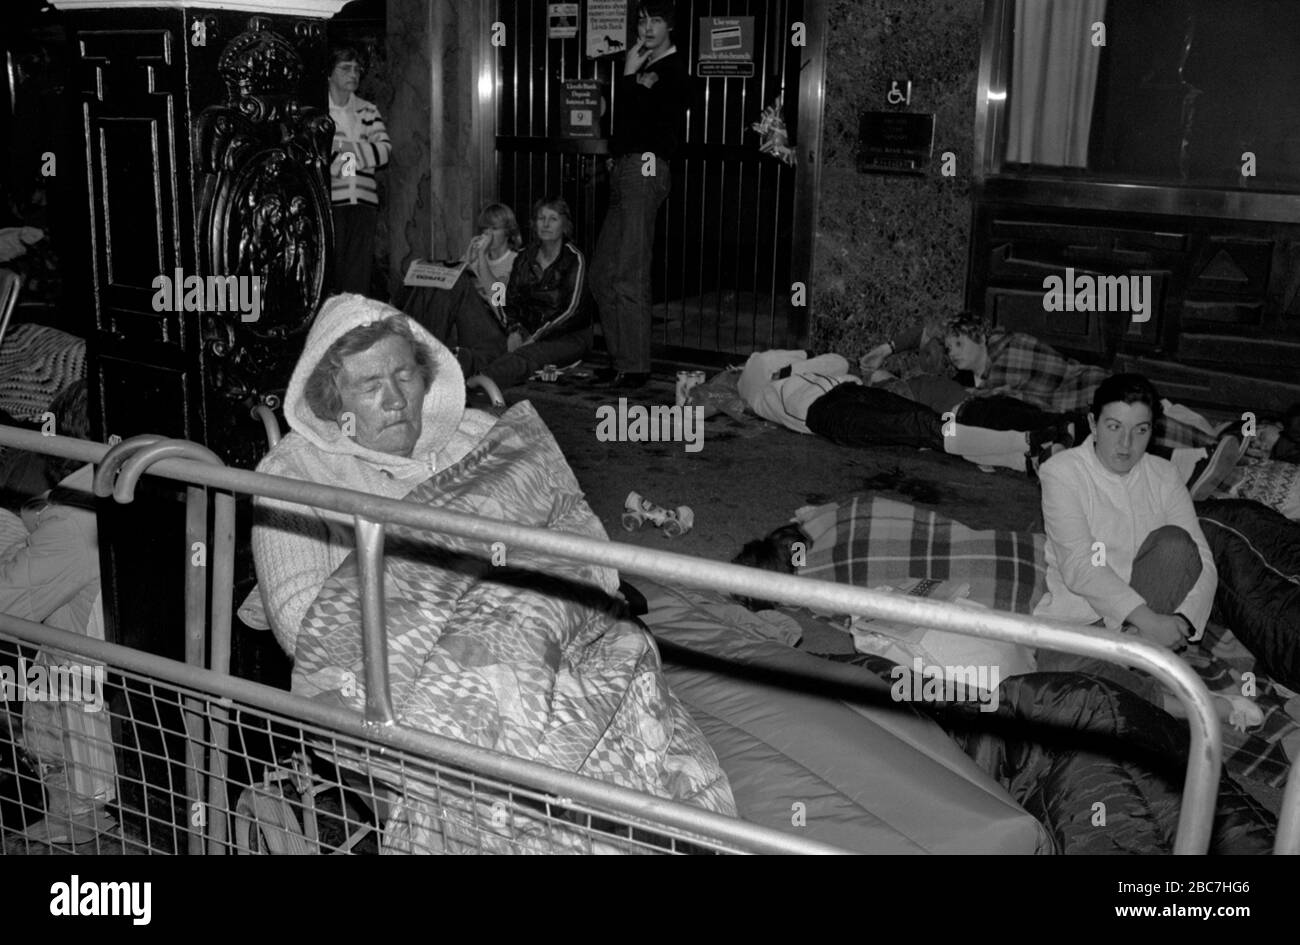 Prince Charles and Lady Diana Spencer Royal Wedding London 1980s  Crowds of well wishers sleep out the night before along The Mall, the parade route so as to get a better view  of the royal procession on the couples wedding day. Wednesday 29 July 1981  UK HOMER SYKES Stock Photo